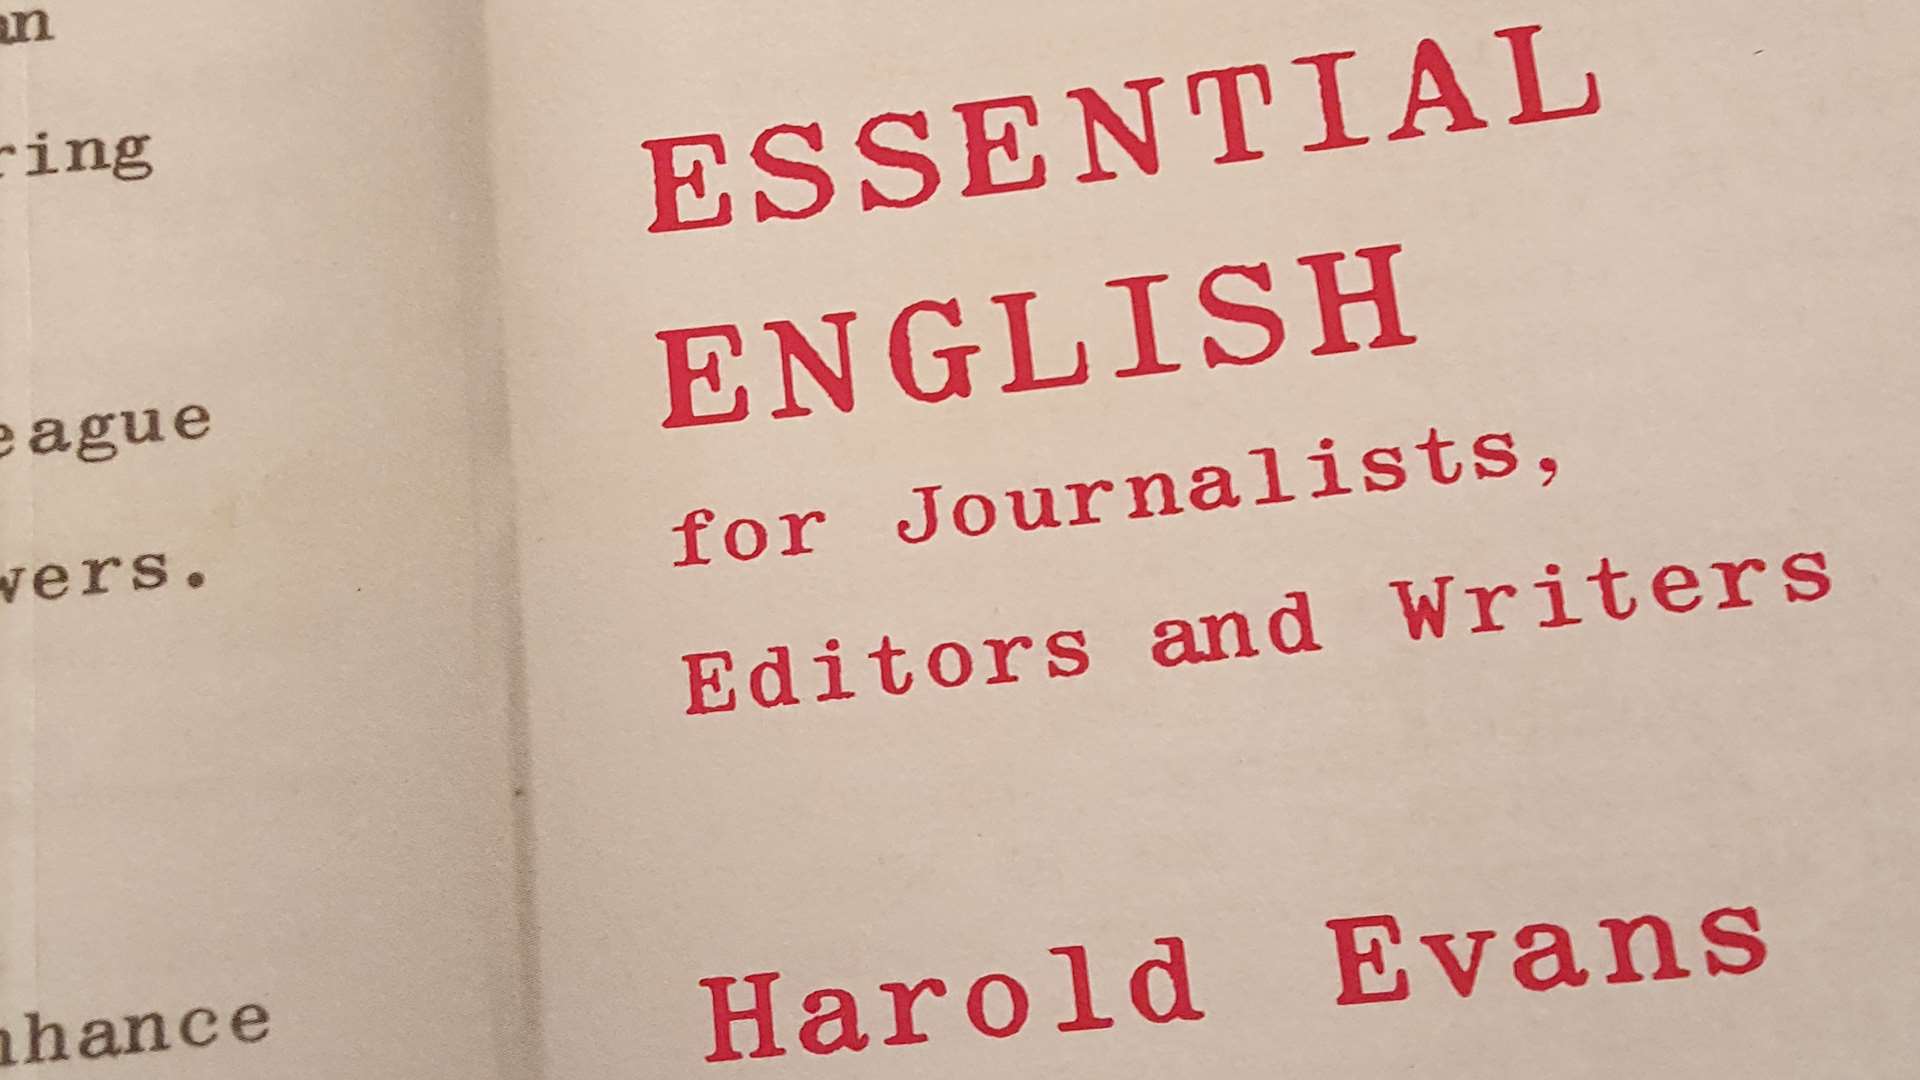 Every journalist should read this book